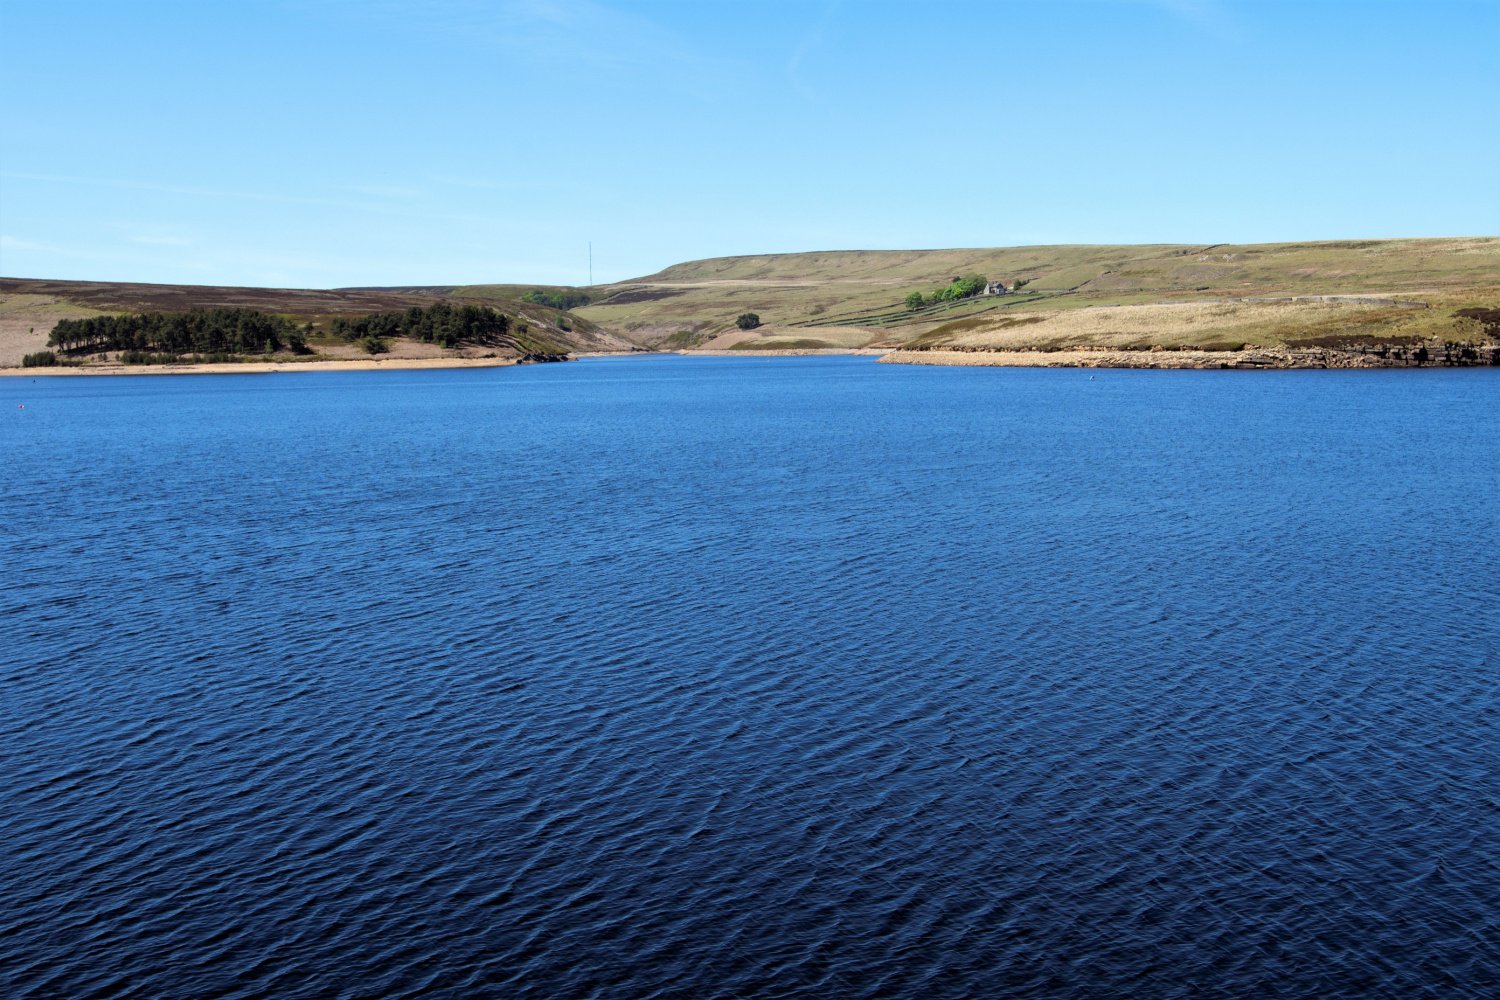 Image name winscar reservoir sheffield south yorkshire the 29 image from the post Walk: Winscar Reservoir in Yorkshire.com.